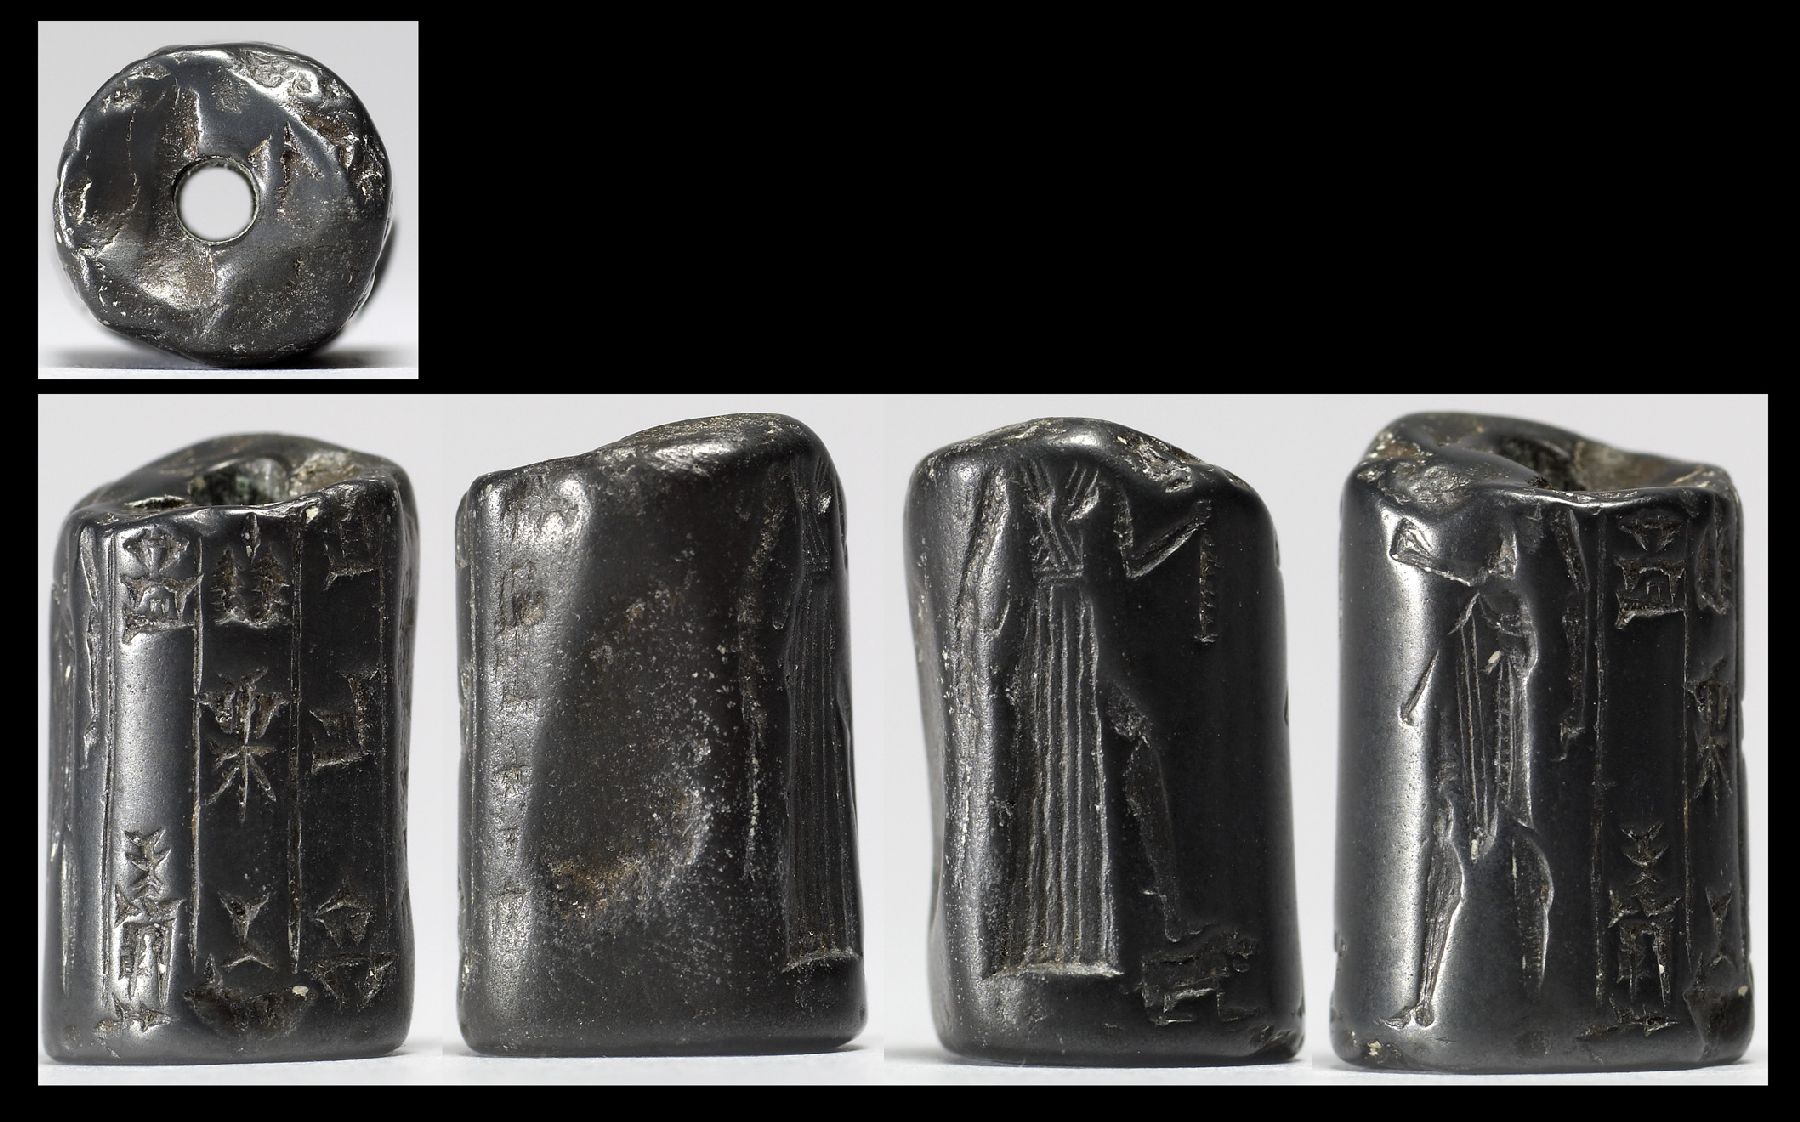 Image for Cylinder Seal Fragment with Standing Figures and an Inscription